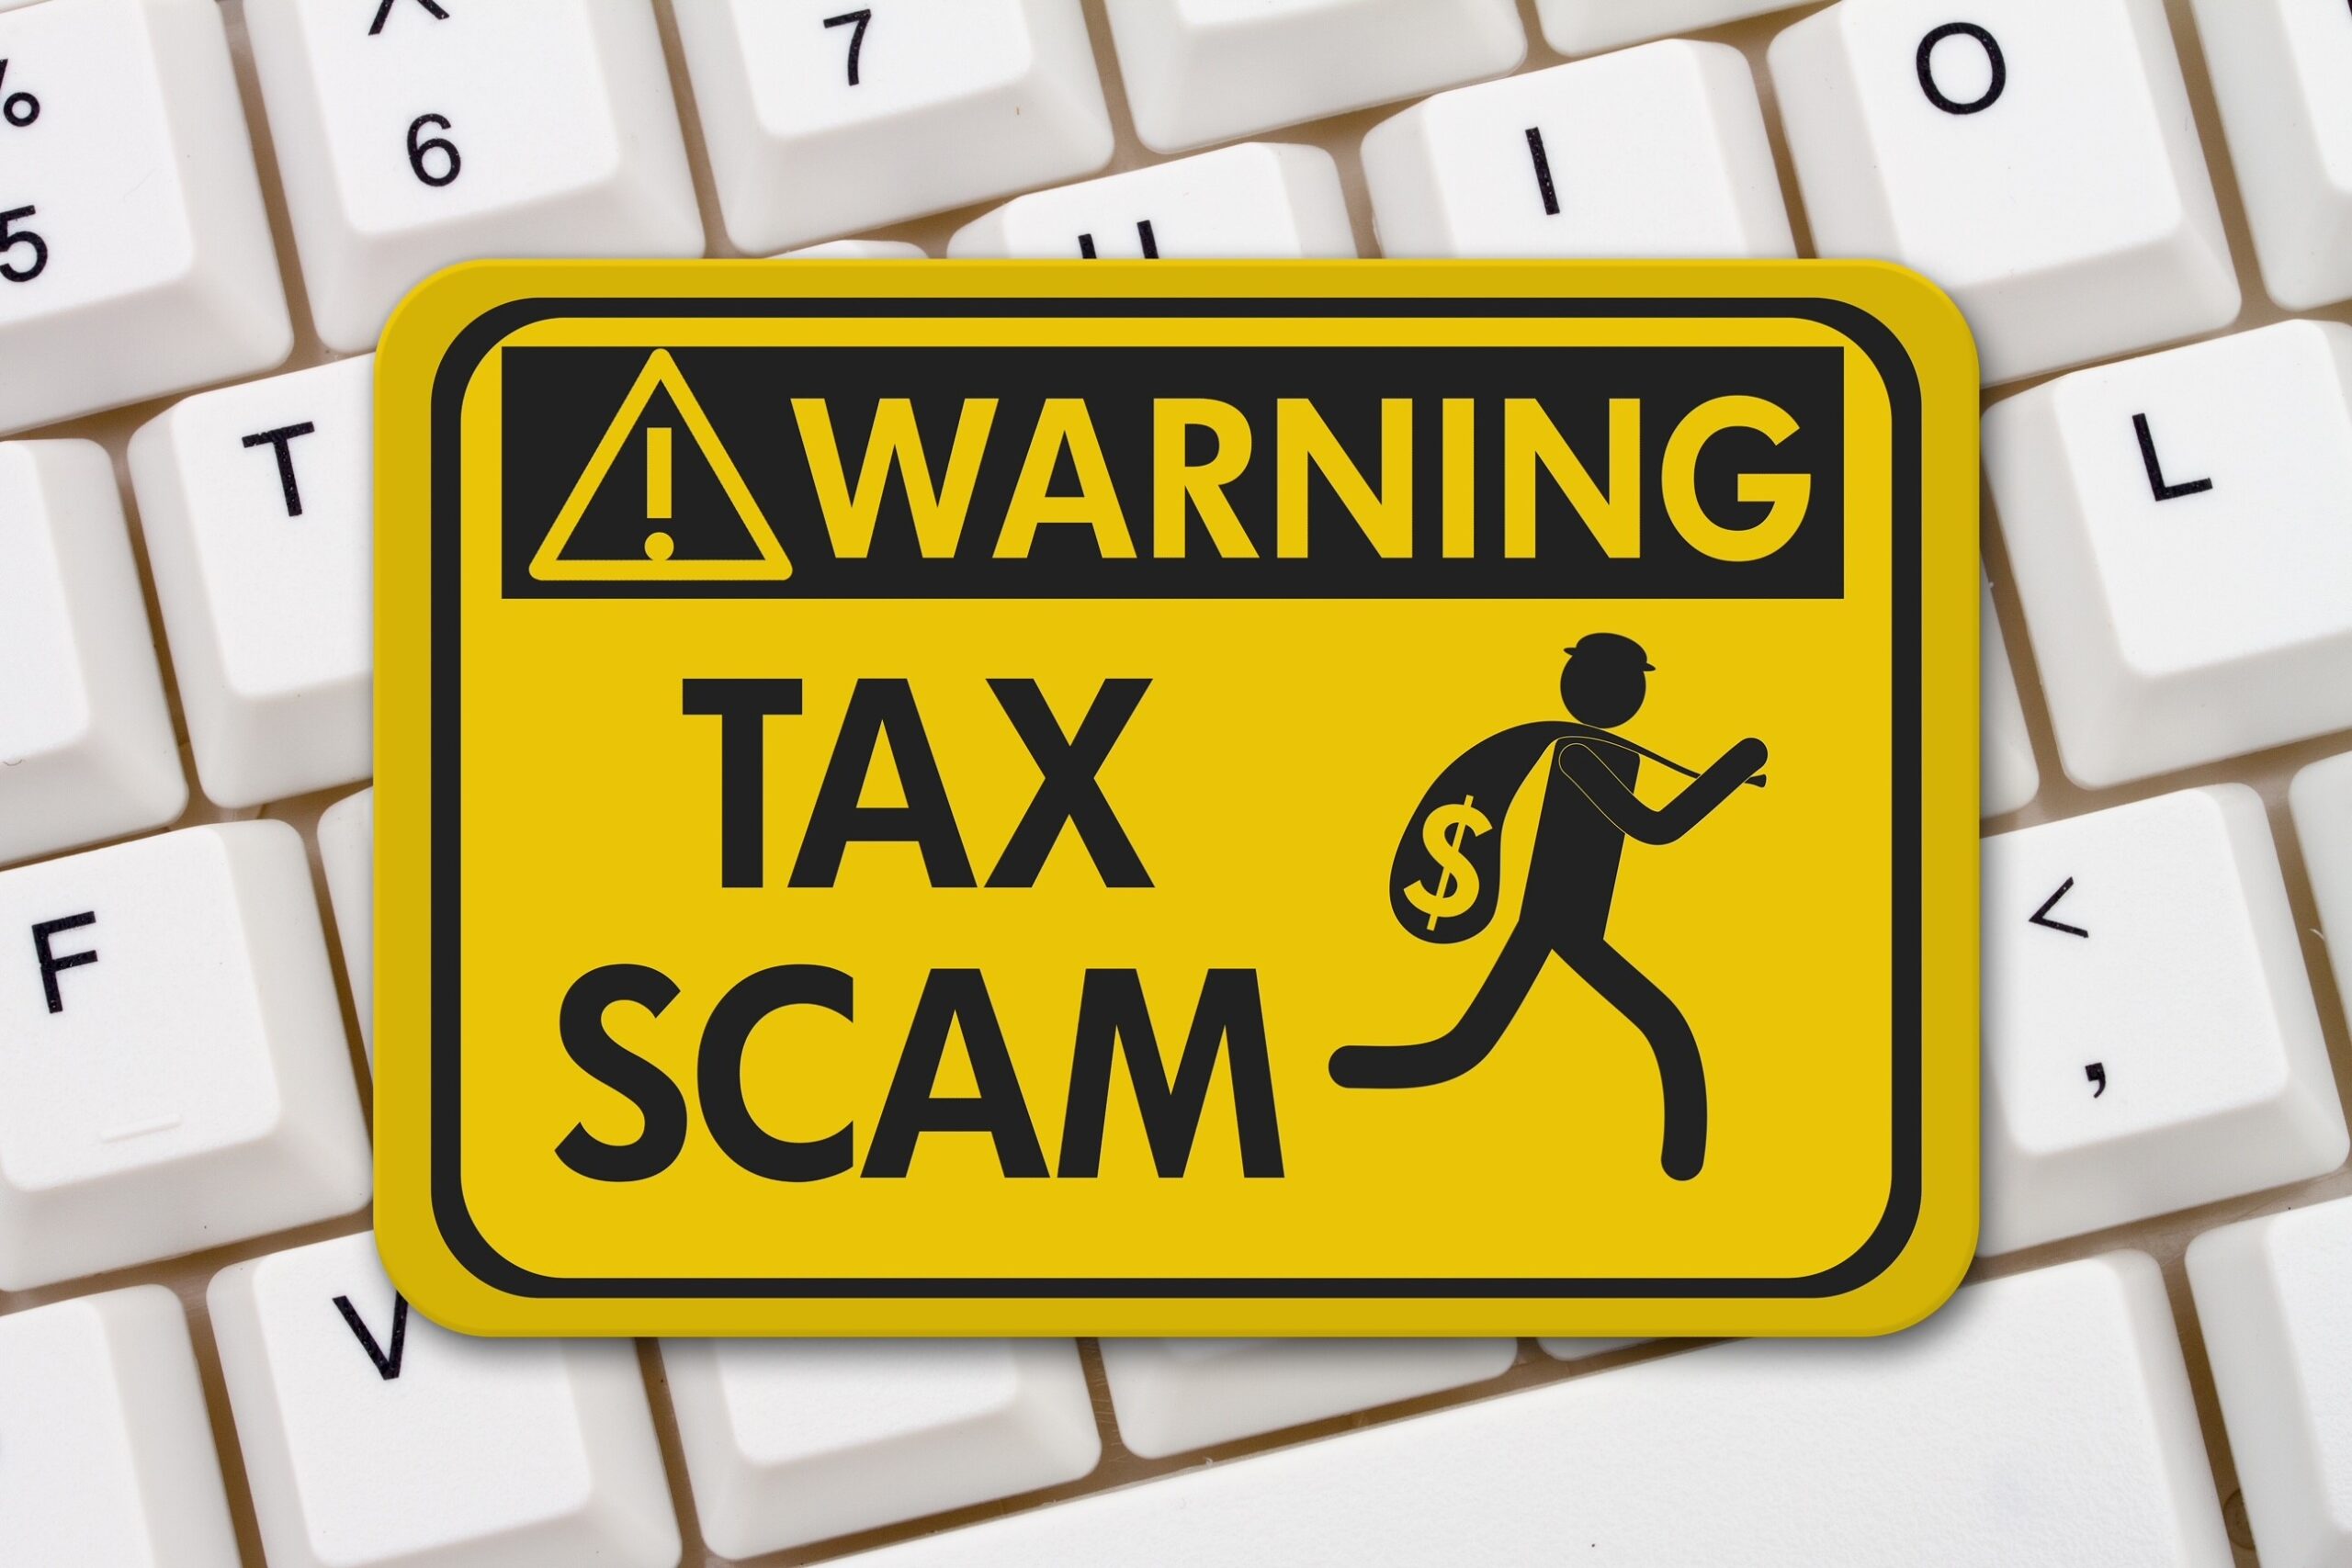 IRS Dirty Dozen Scams: What You Need to Know